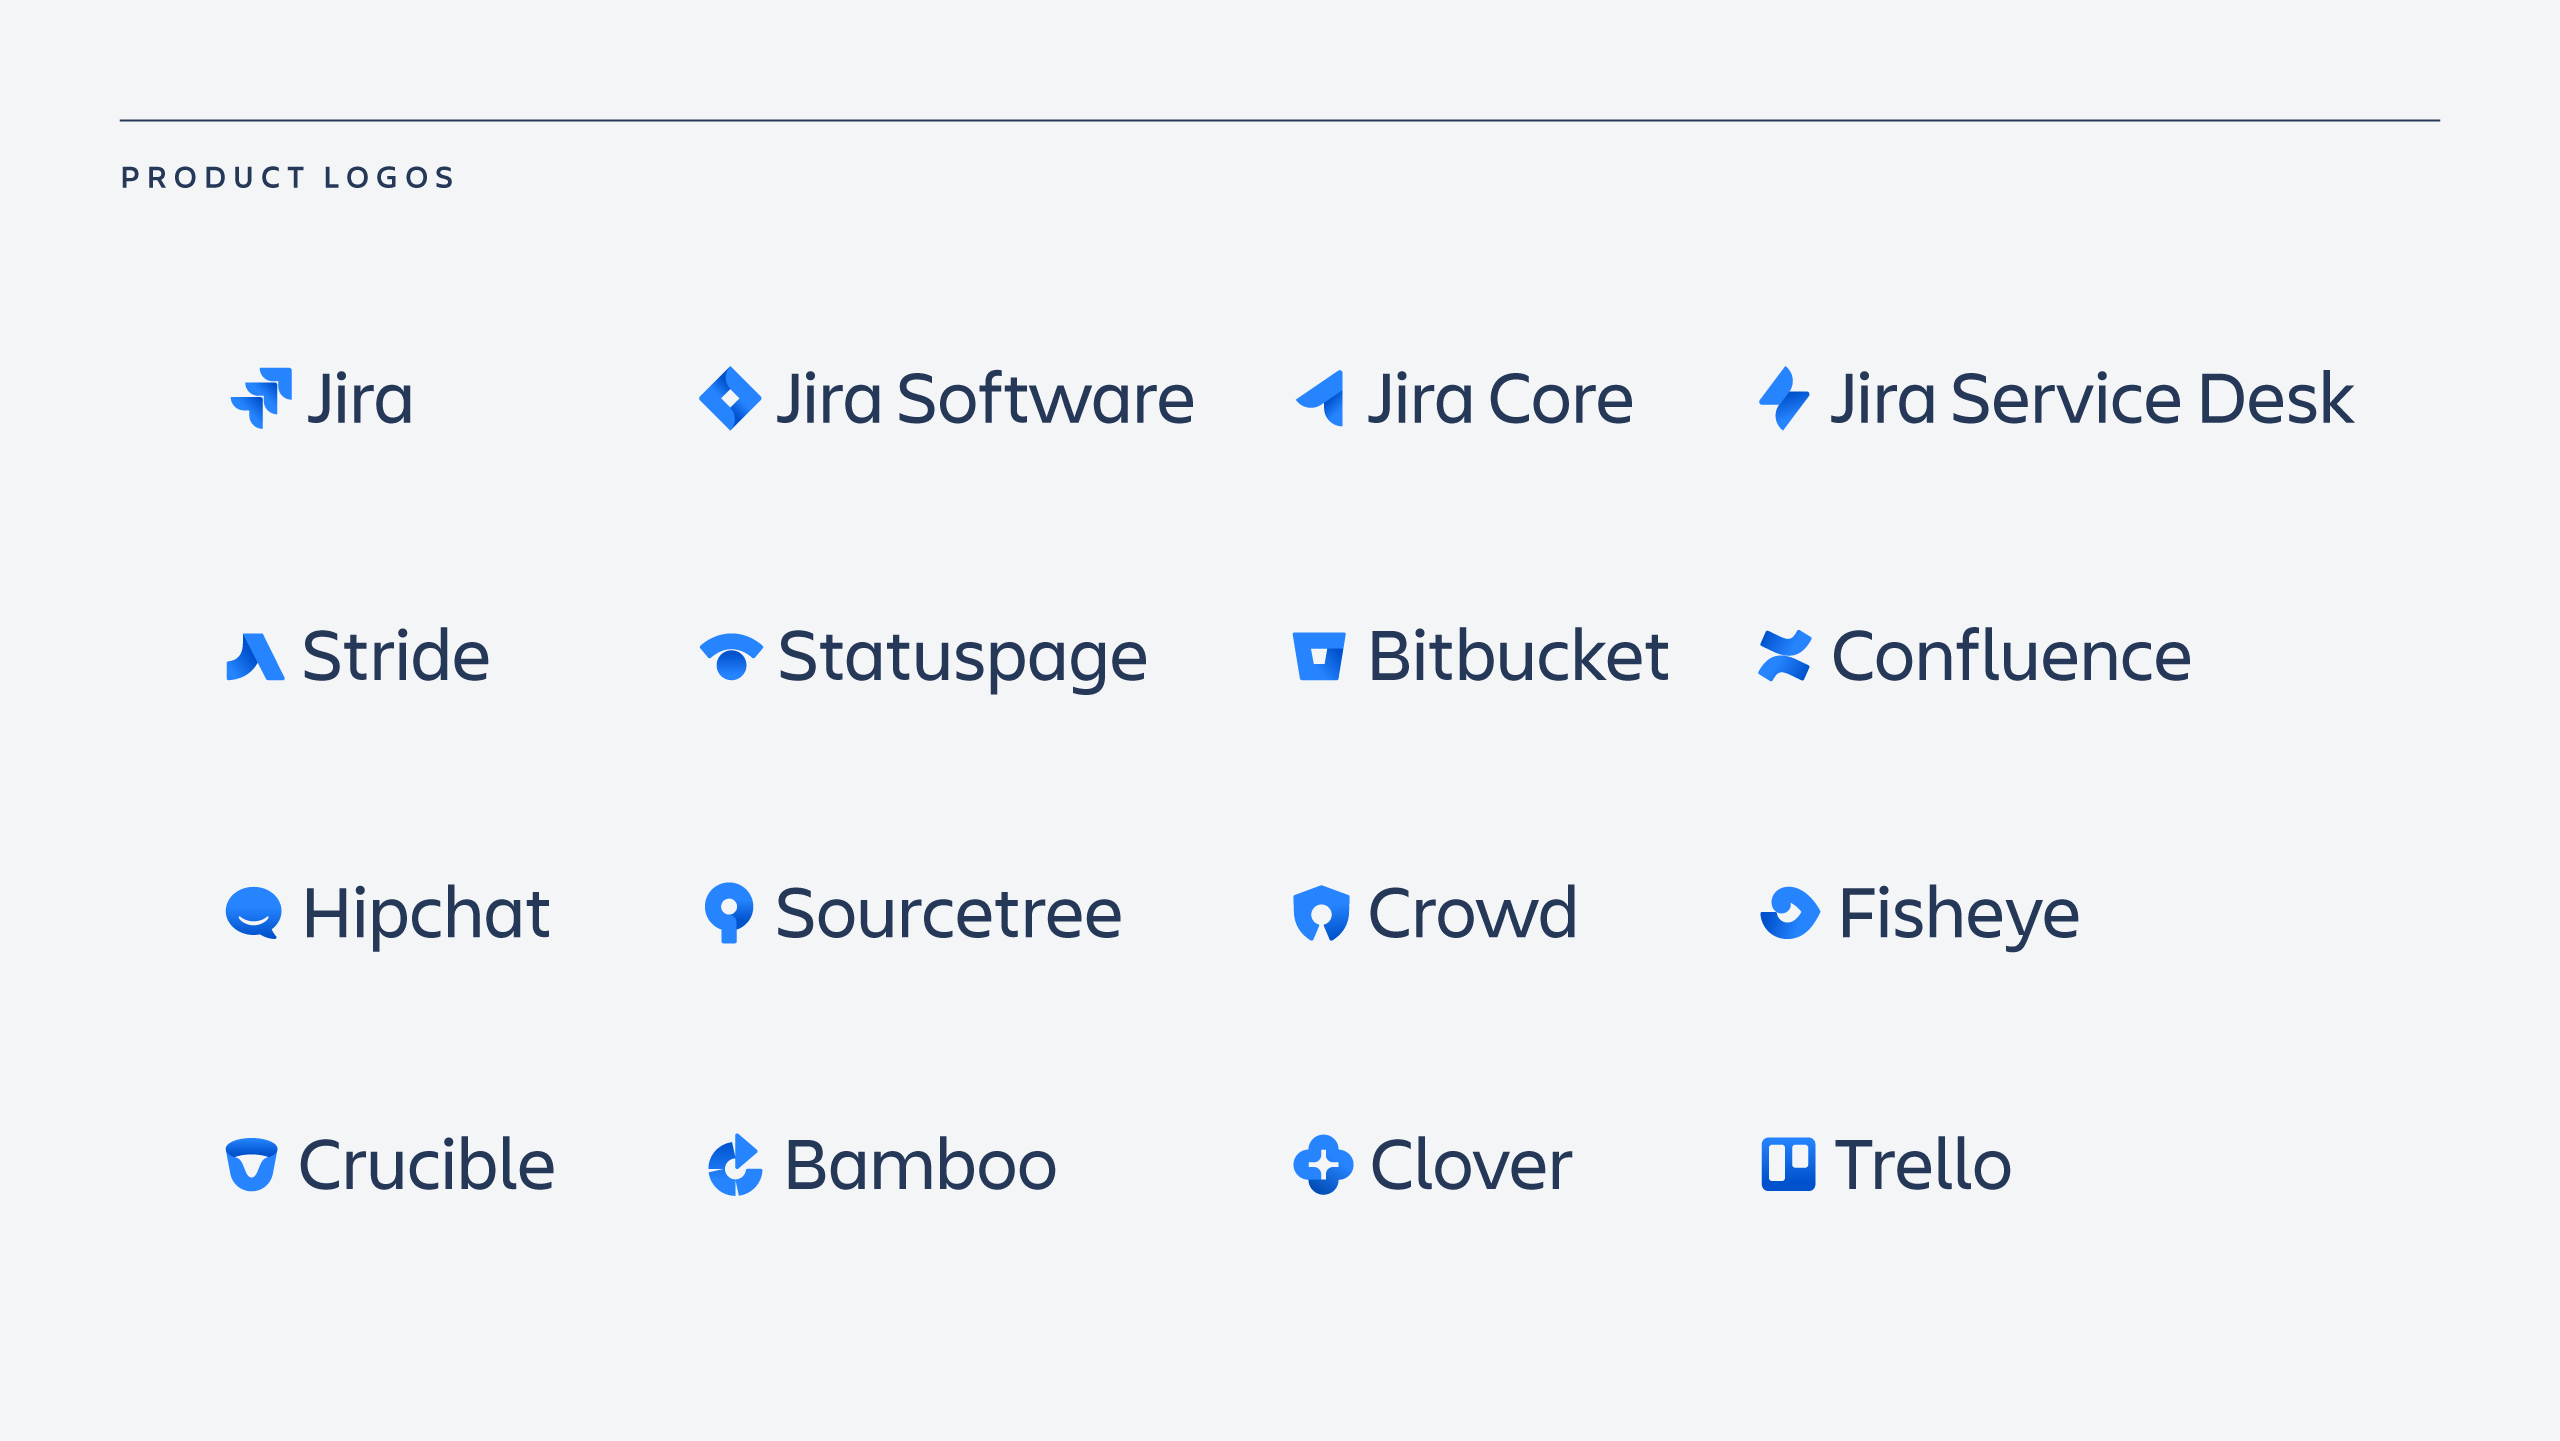 JIRA Logo - Our bold new brand